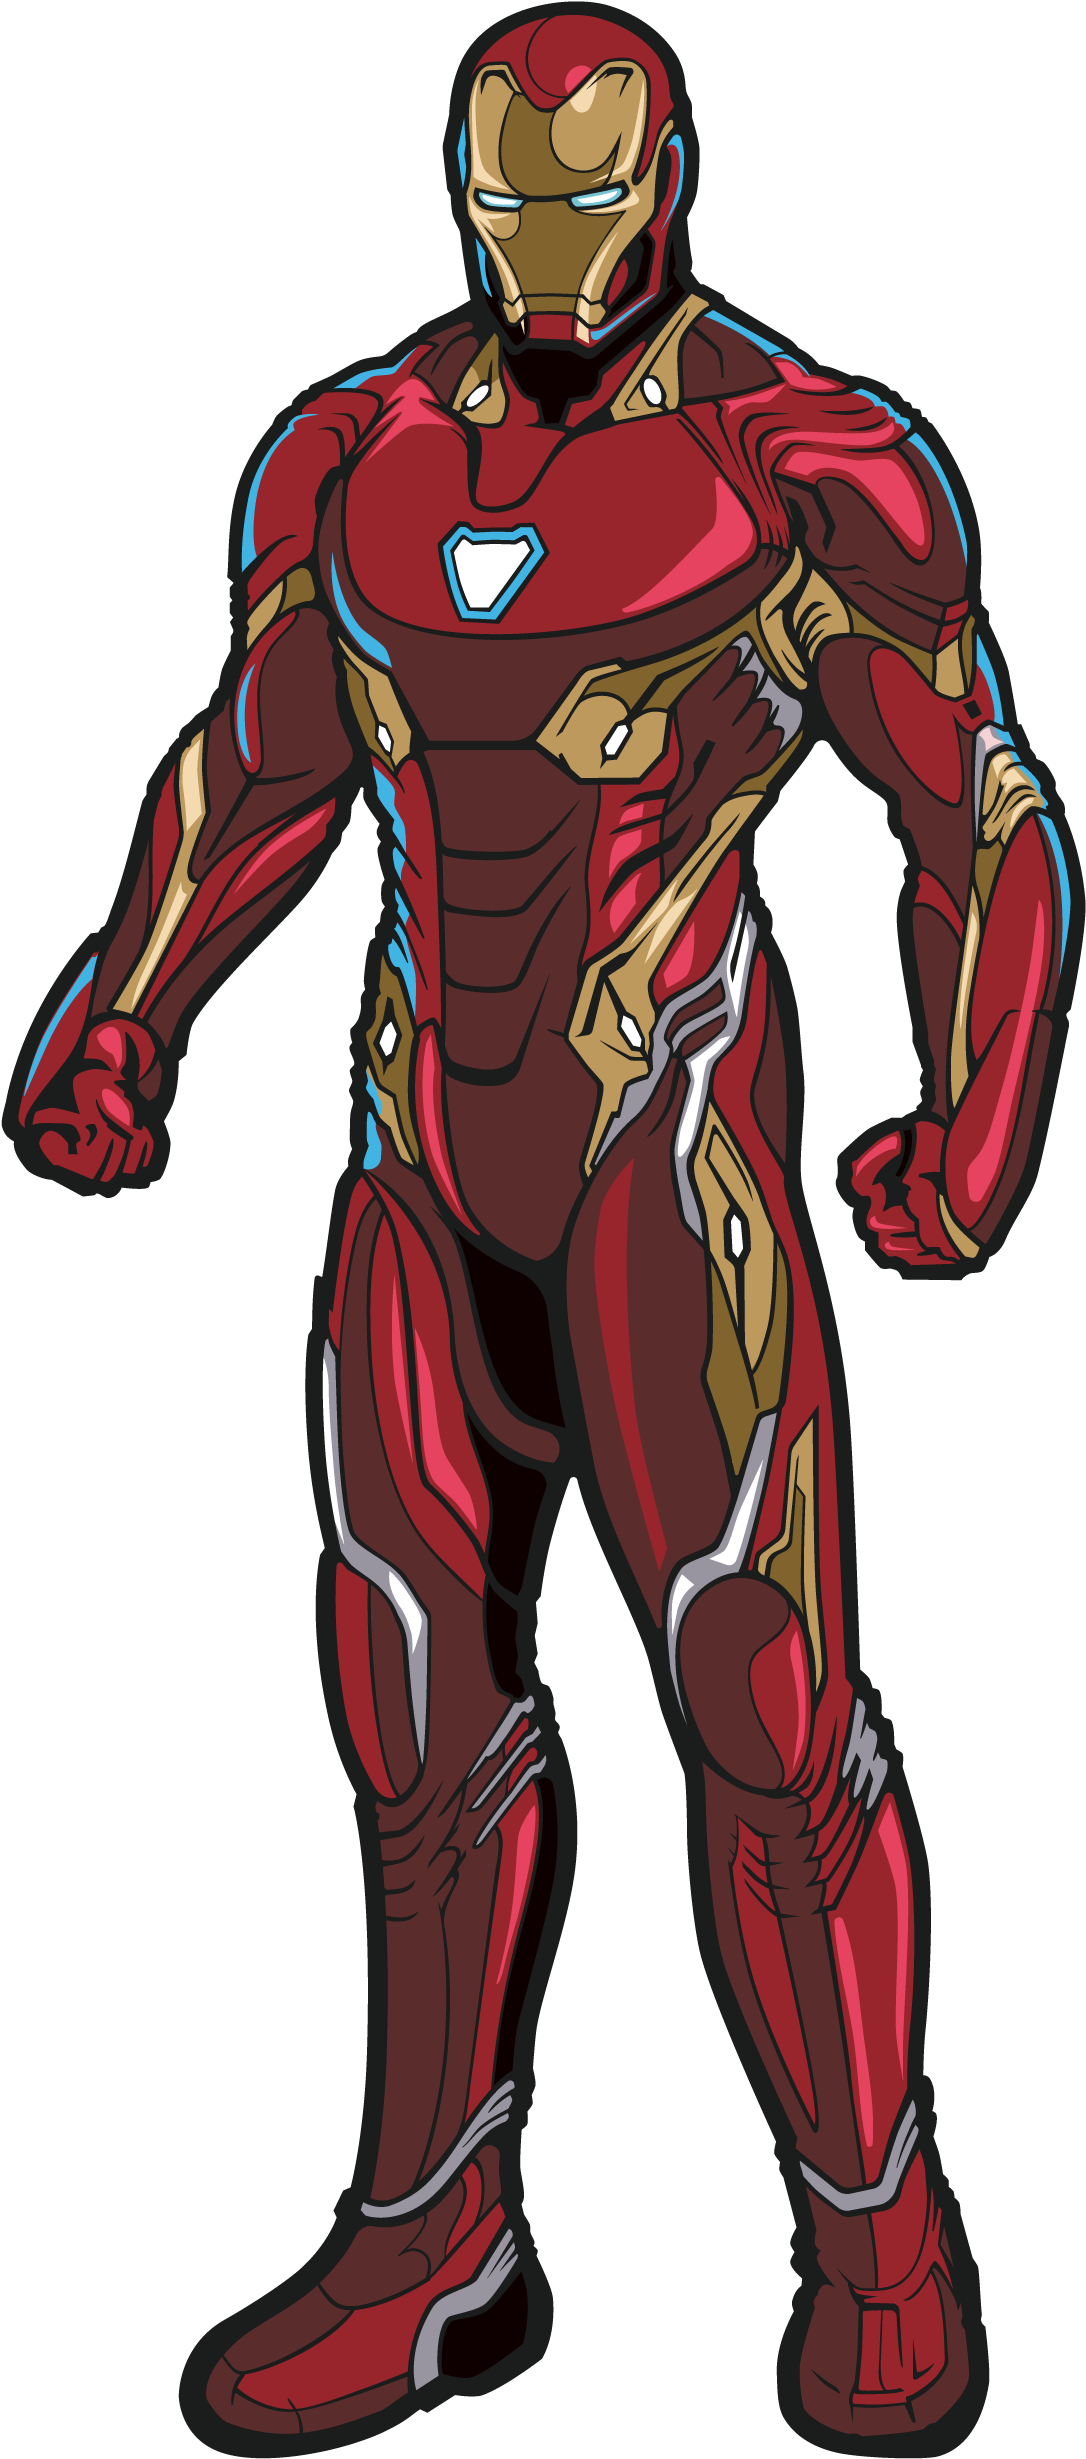 MARVEL INFINITY GUARR Iron Man PNG Immagine Trasparente